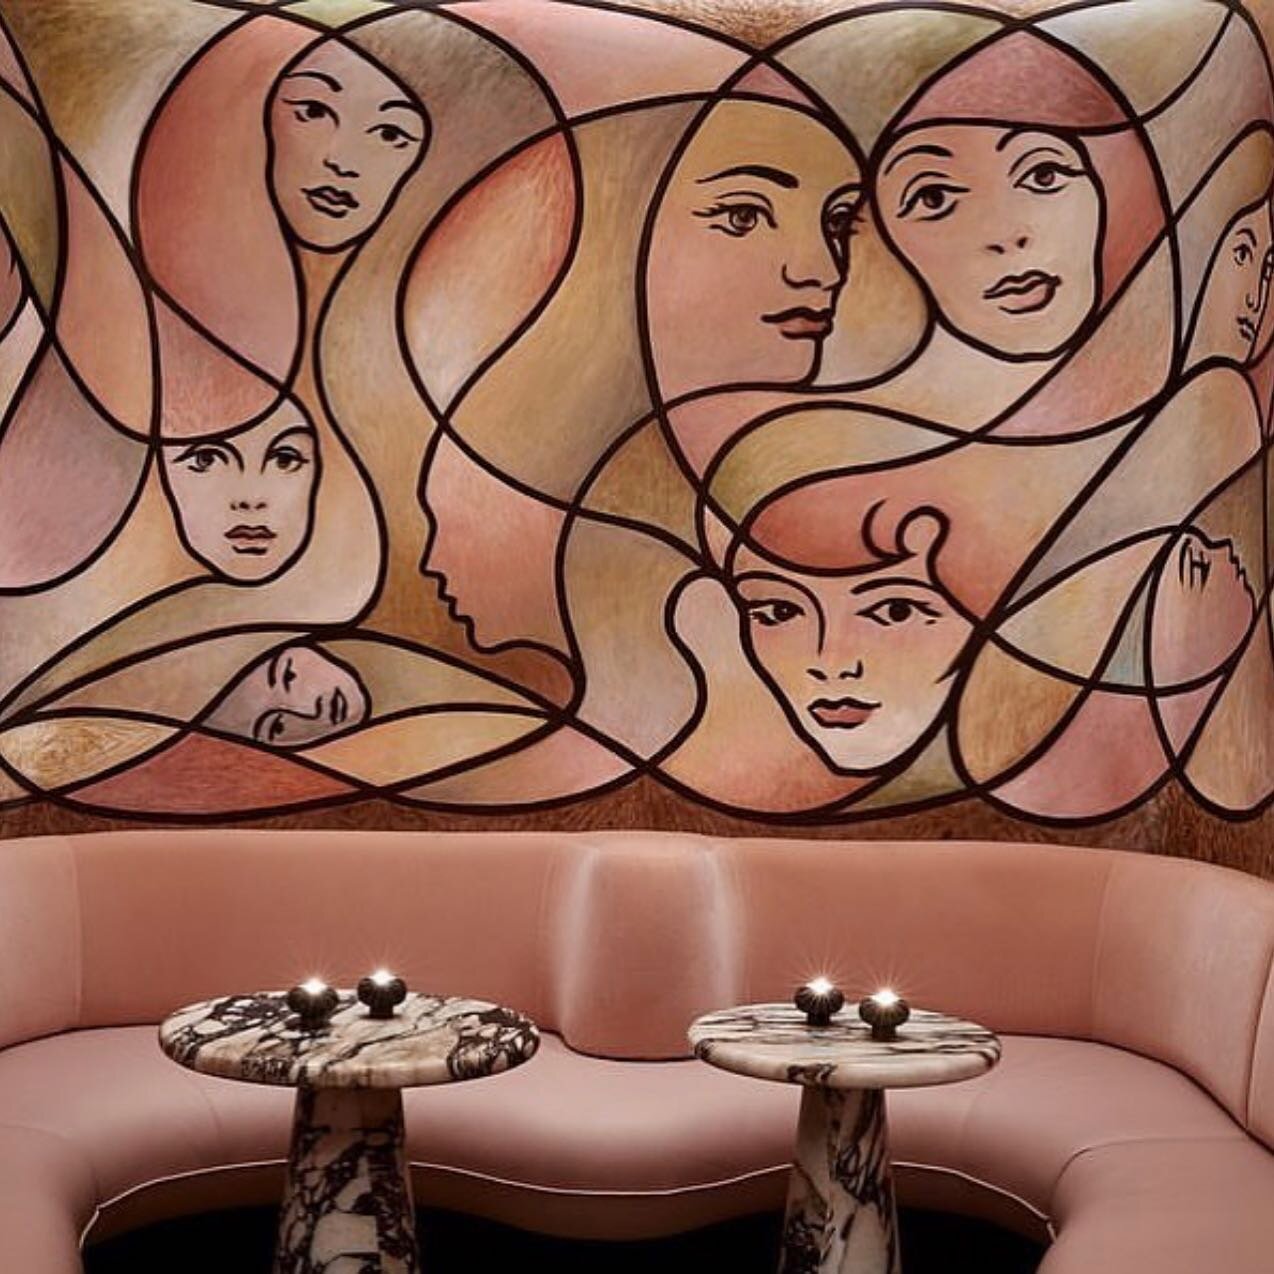 Playful and charming inspo // Eye-catching mural at @the_berkeley bar in London, painted by New York artist @tmdavy 

PC: @jamiemcgregorsmith 
.
.
.
.
.
.
#fridayvibes #inspo #muralart #ambiancecurator